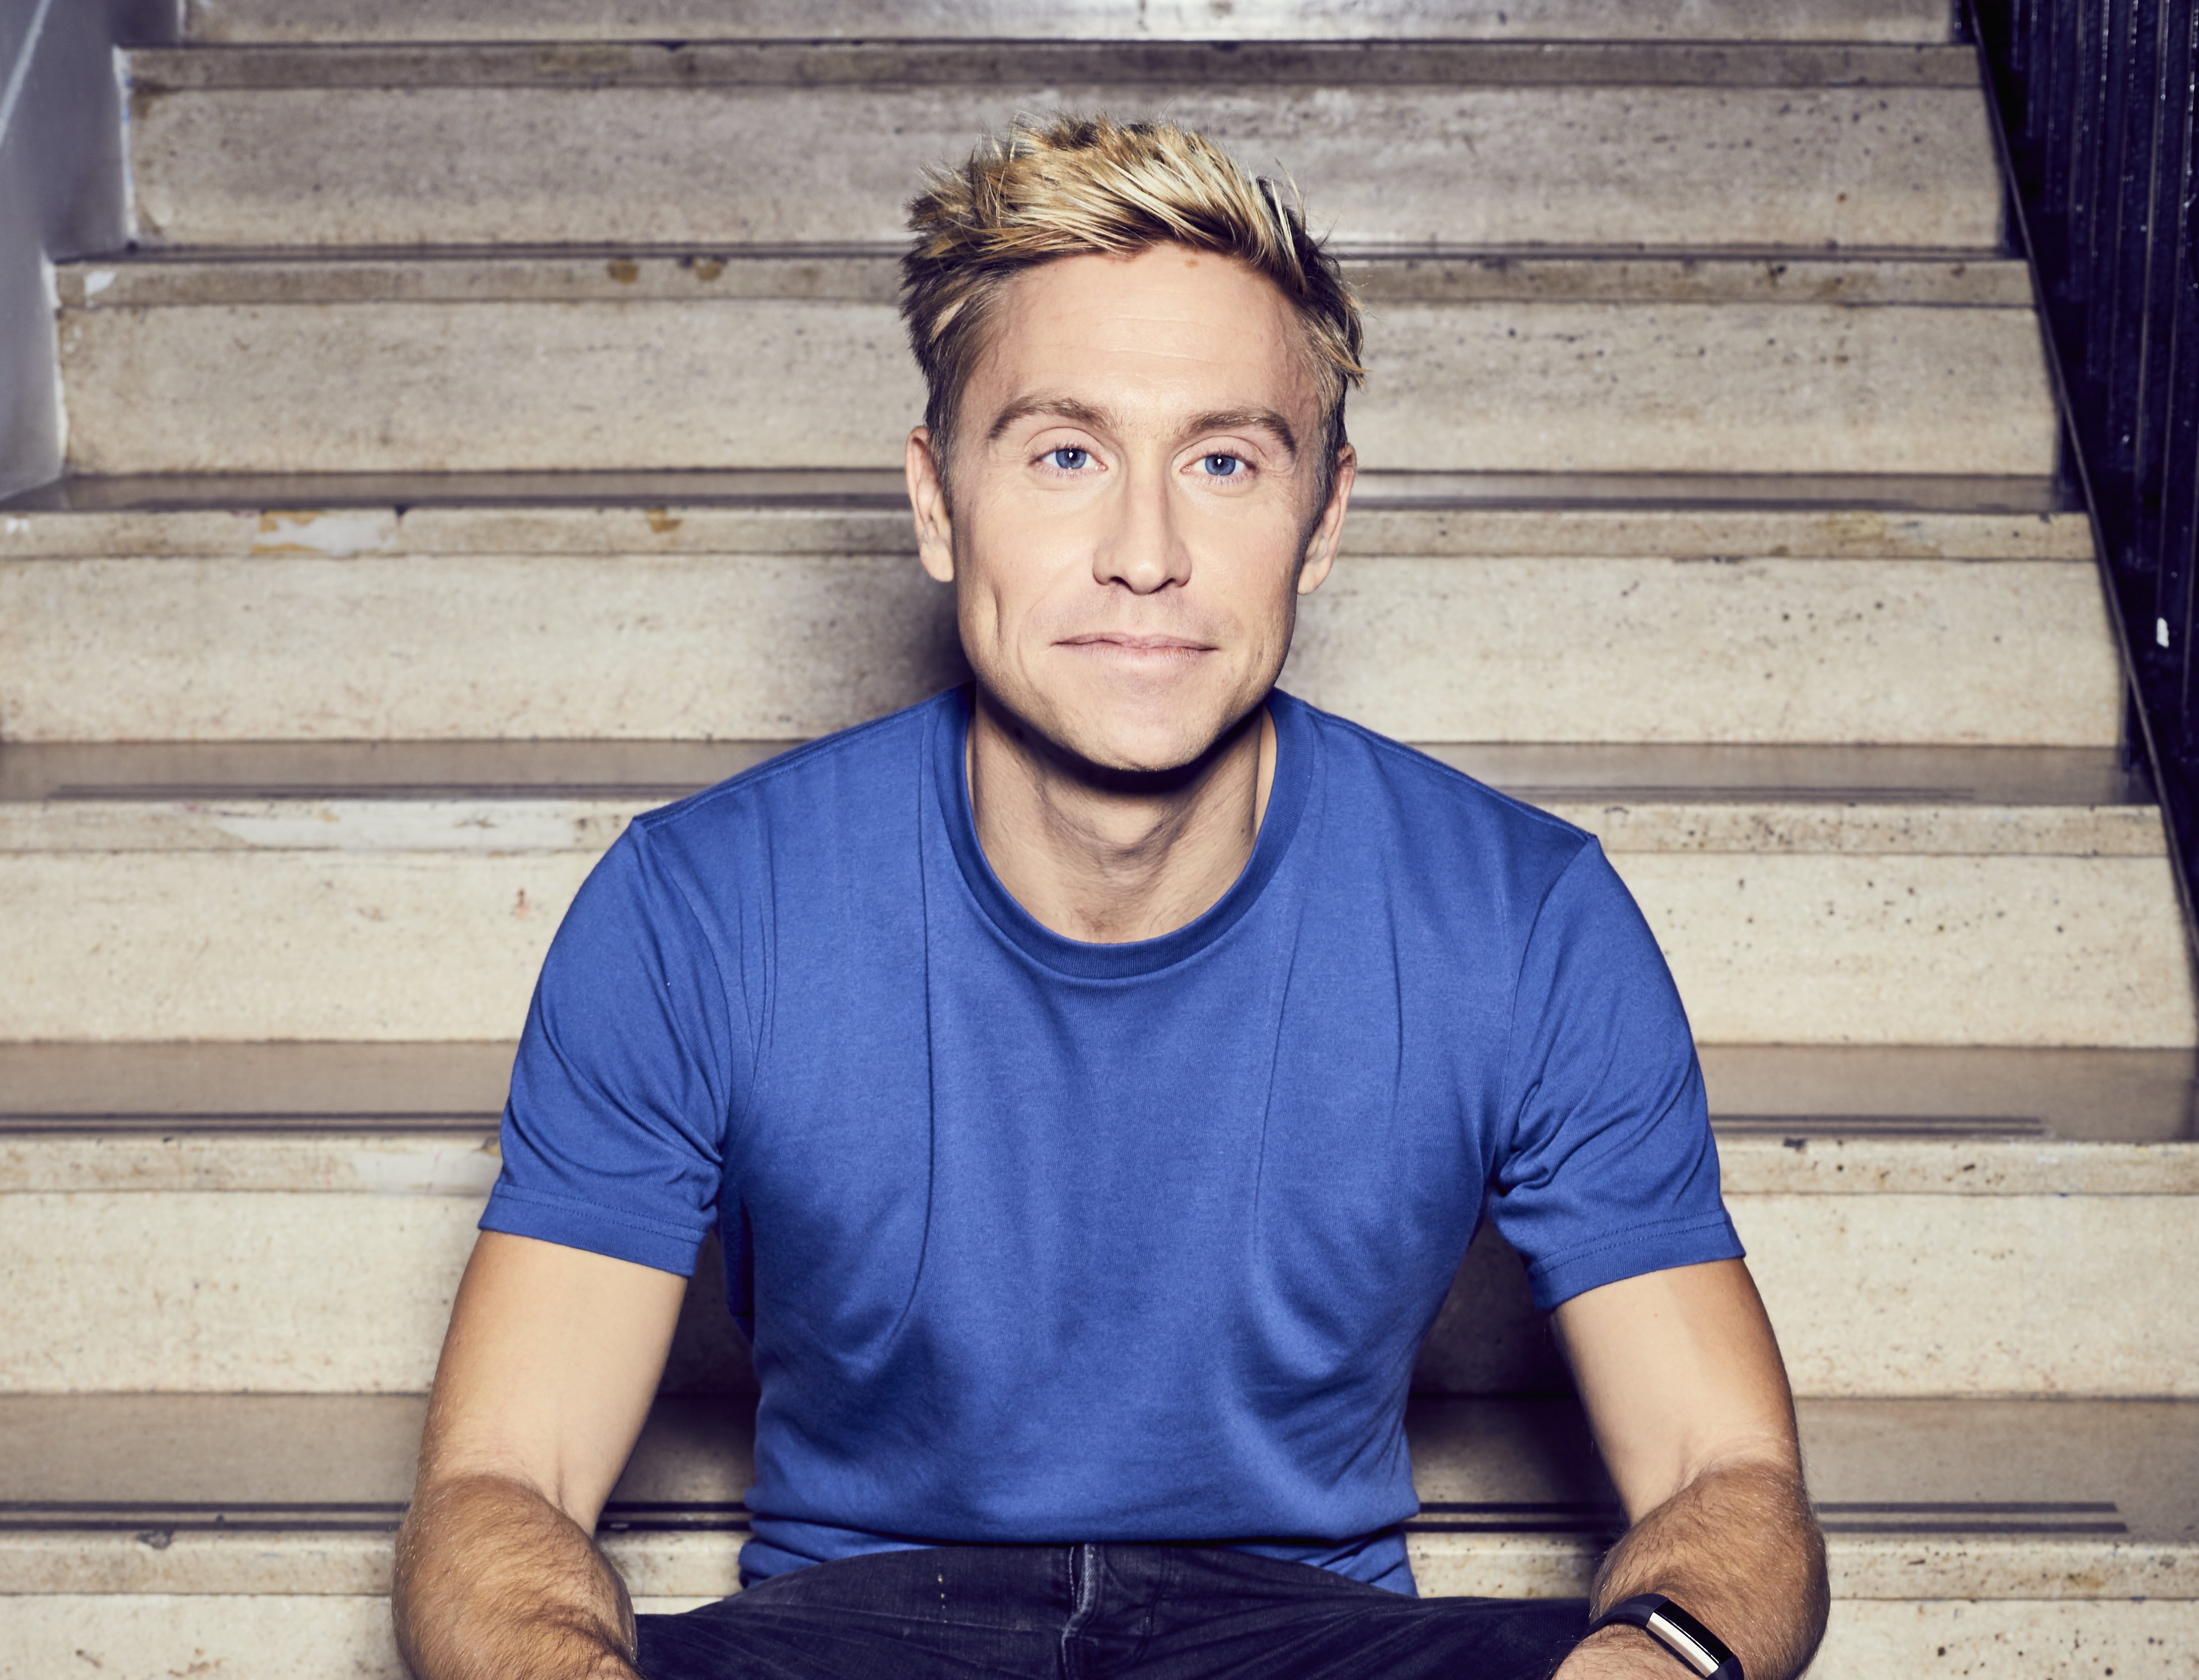 russell howard tour age restriction